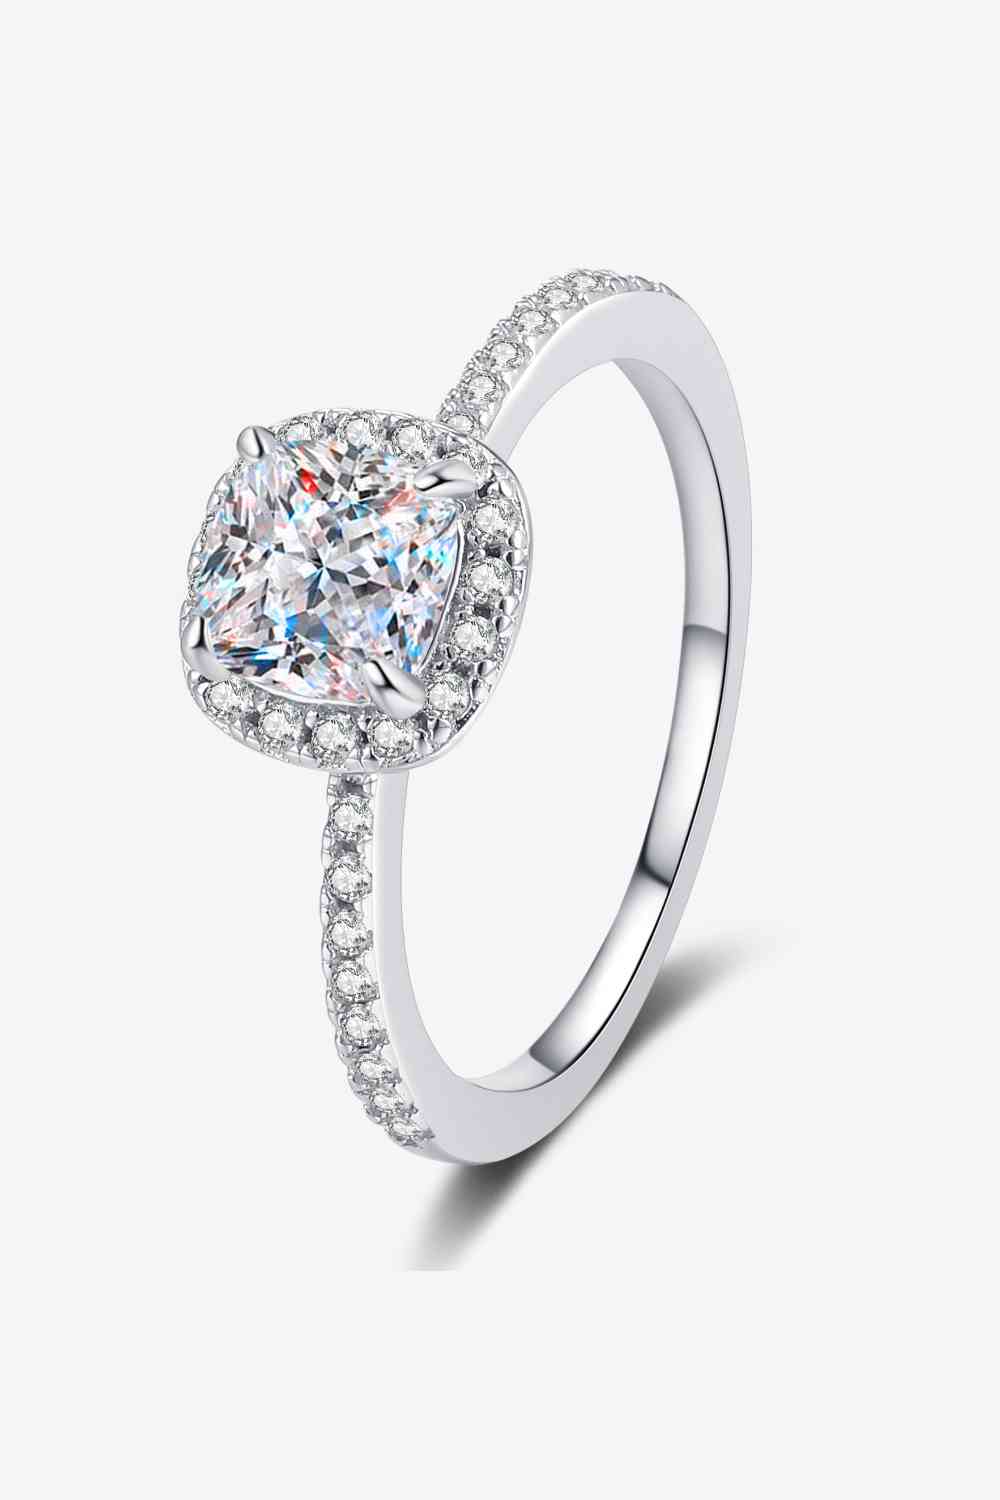 PREORDER- 1 Carat Moissanite 925 Sterling Silver Halo Ring